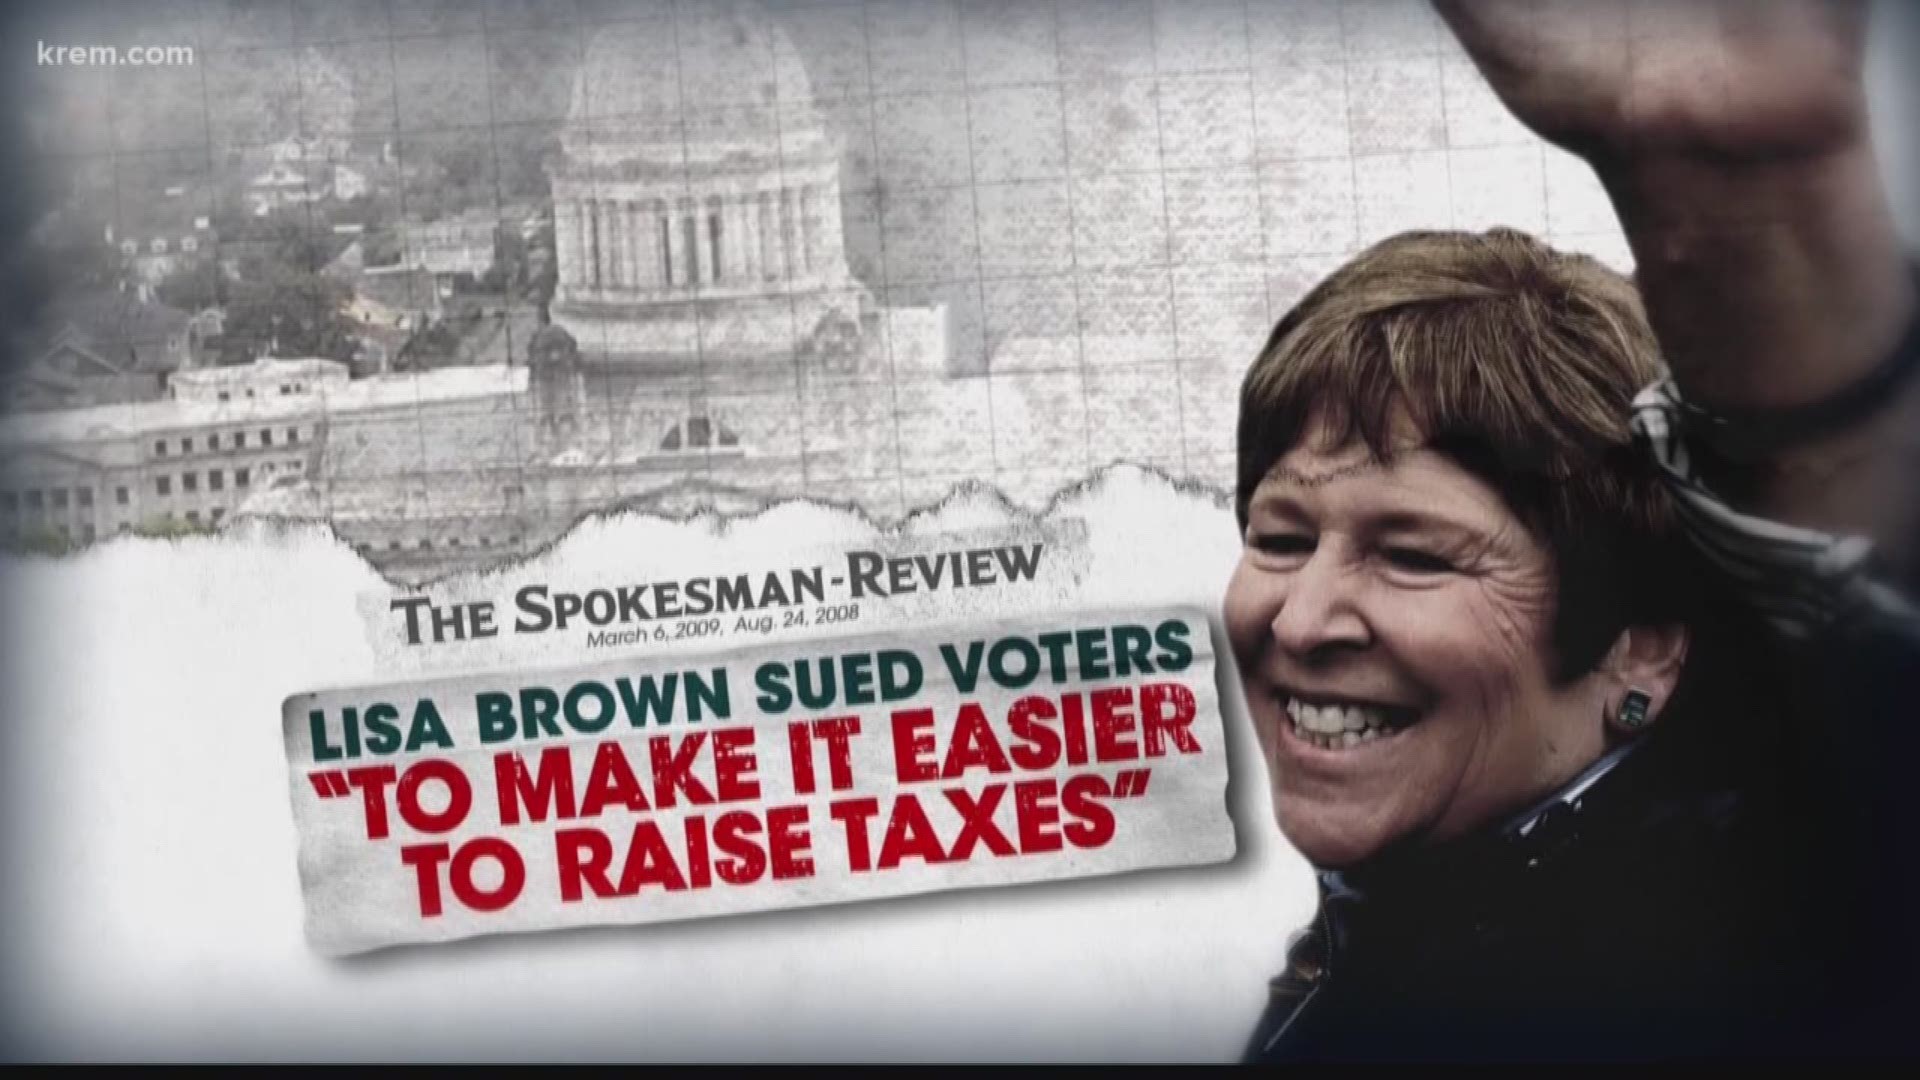 Fact checking more local political ads from Cathy McMorris Rodgers, Lisa Brown